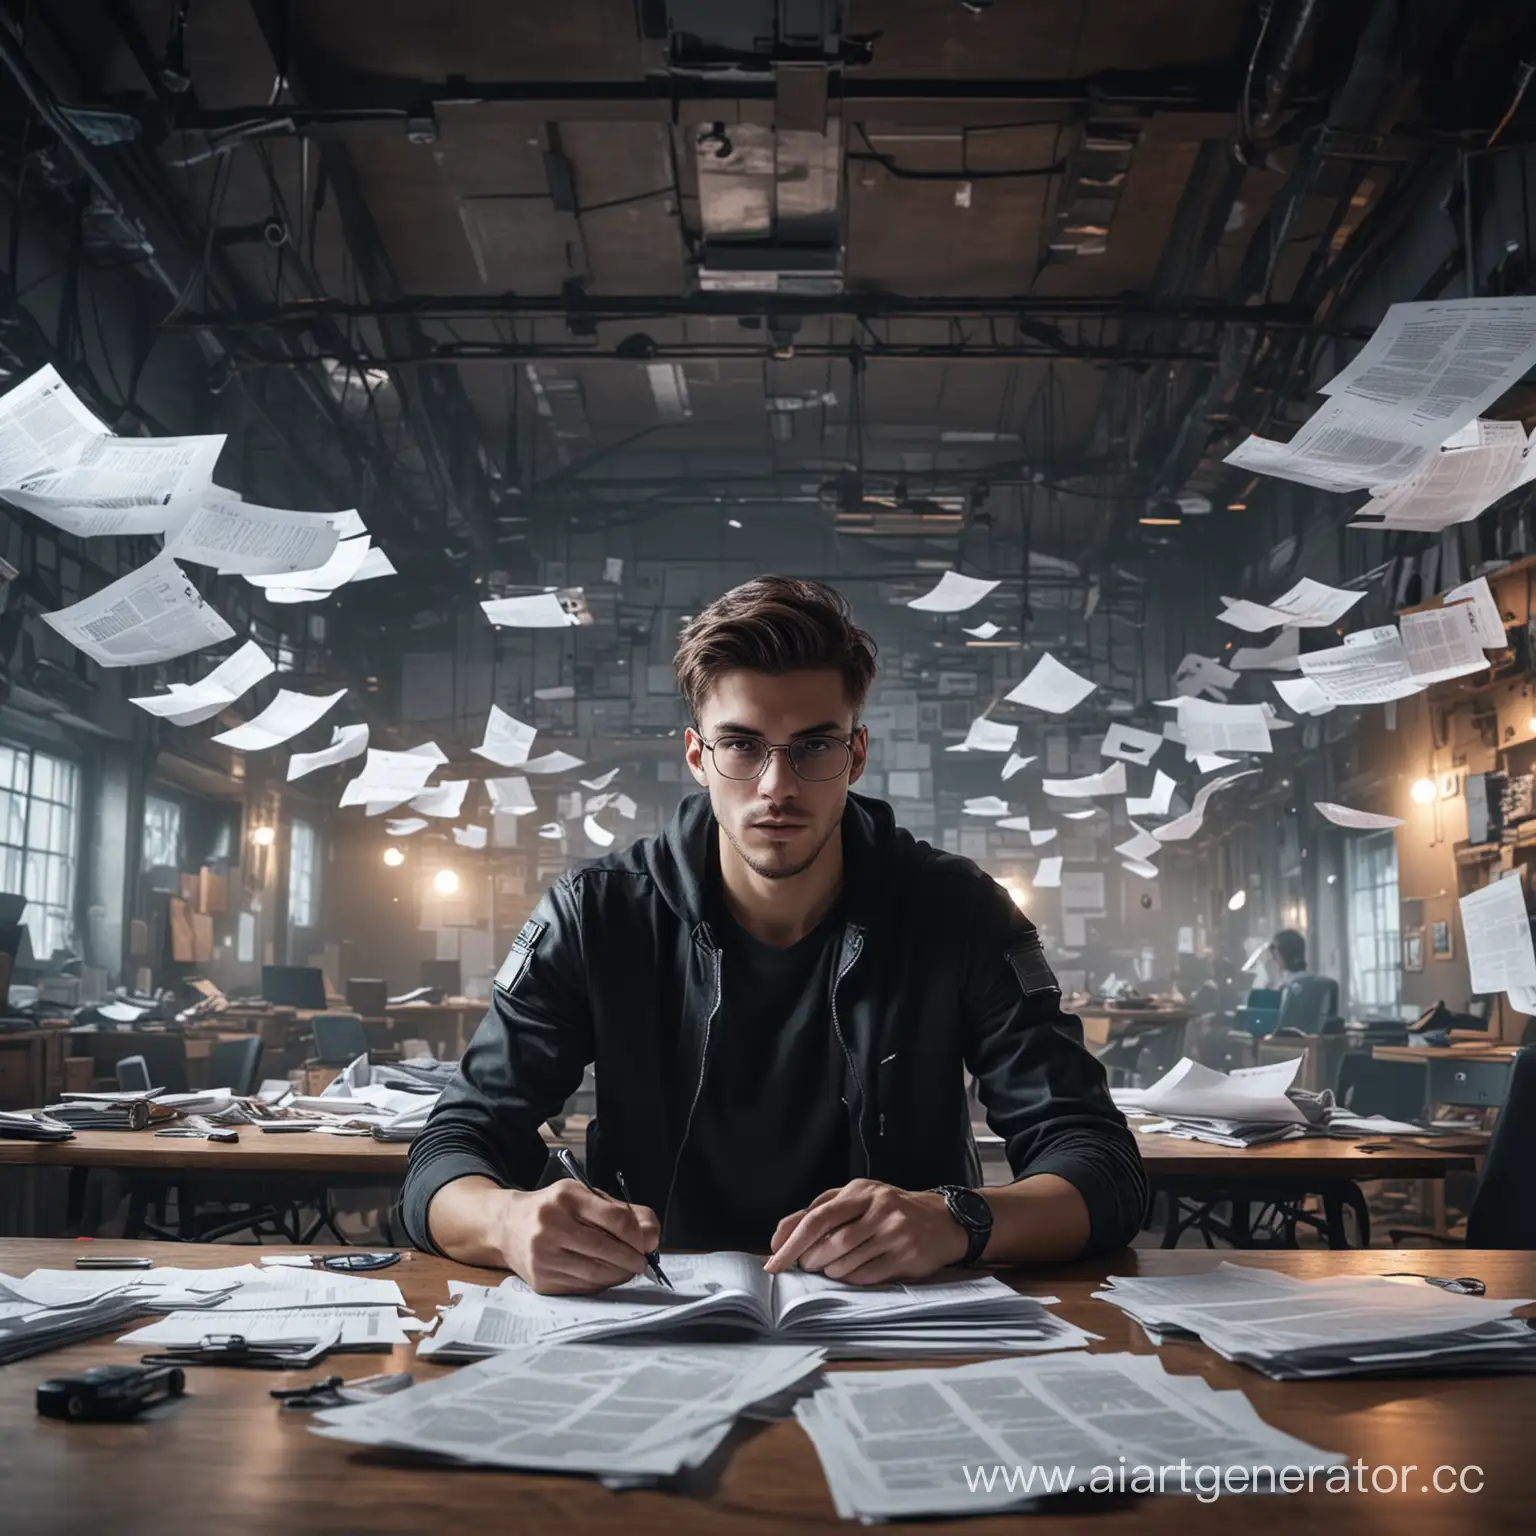 young man sitting at a table in the center of the room and going through papers, young man looking forward without glasses, the room is empty in hitech style, papers flying around, high quality, cyberpunk style